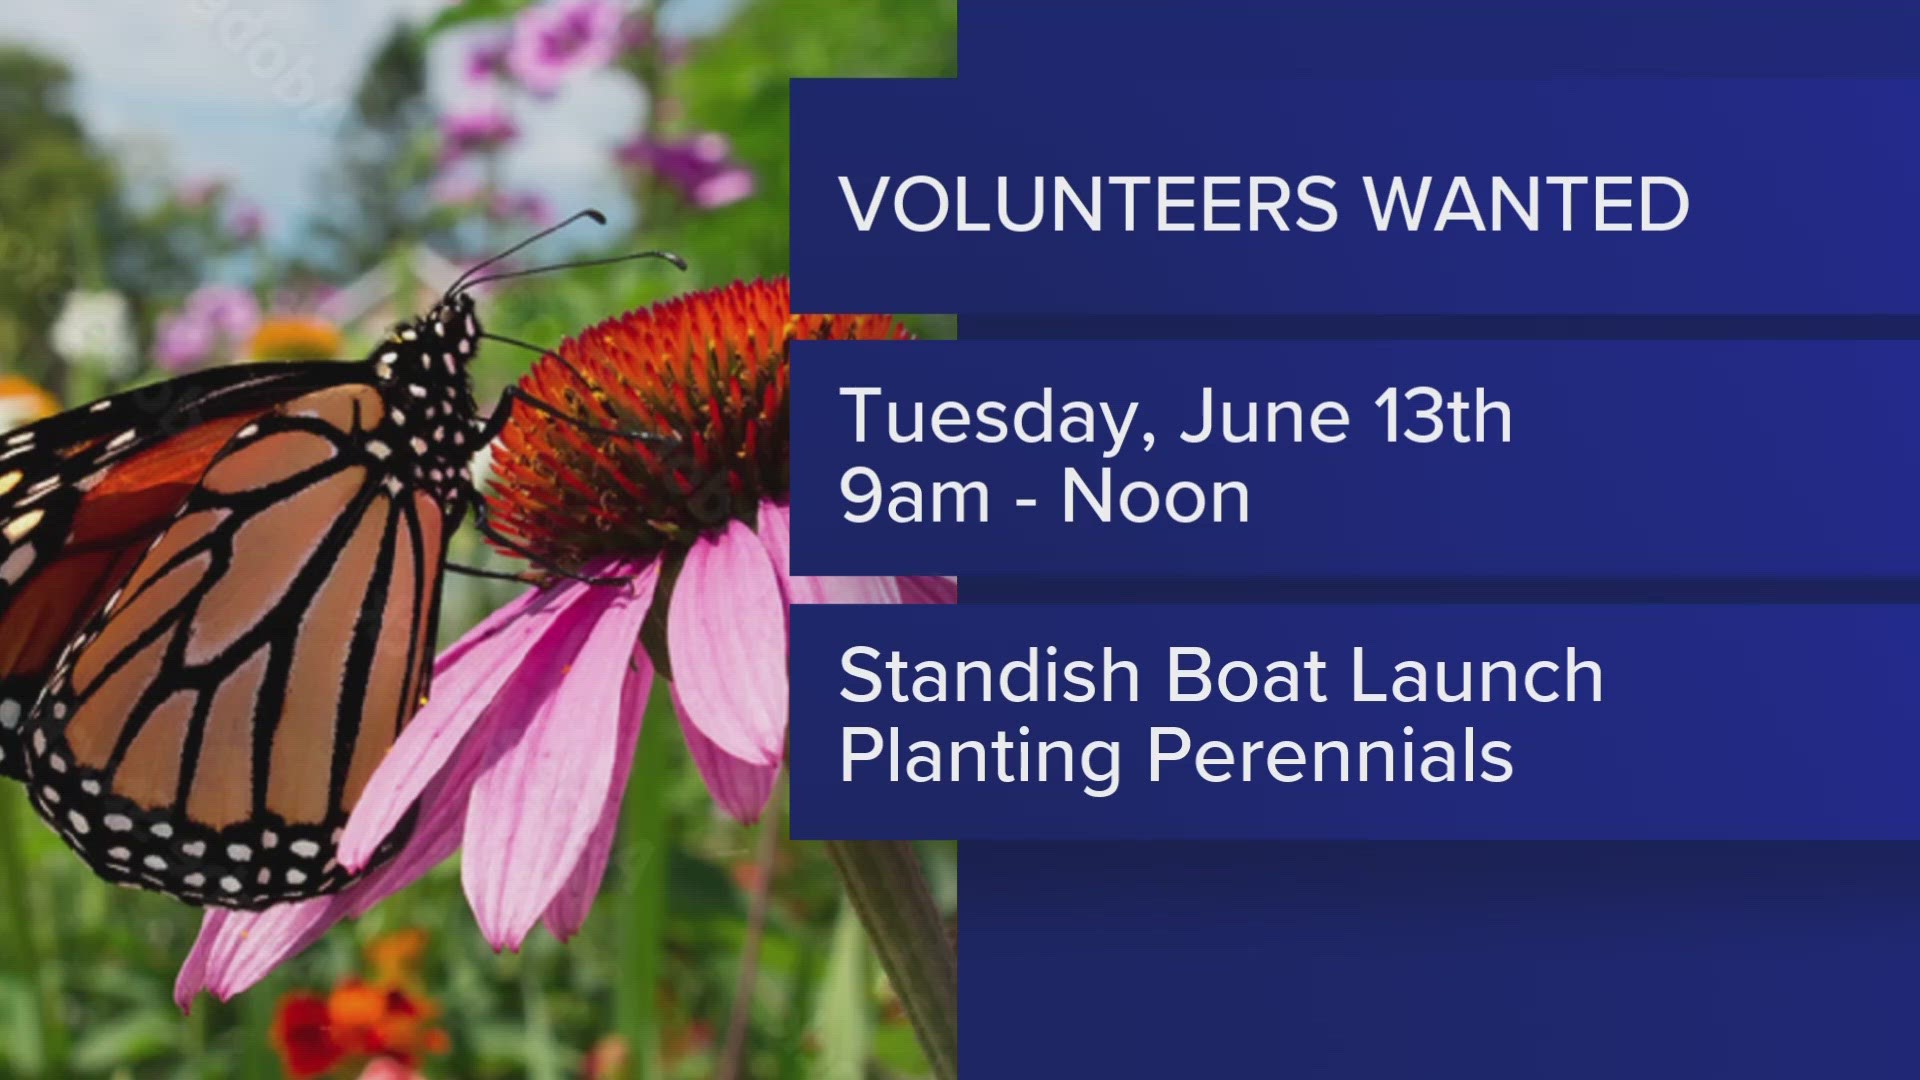 The Portland Water District and the Standish Parks and Rec Department are asking for volunteers to help plant a garden that will help fight pollution.